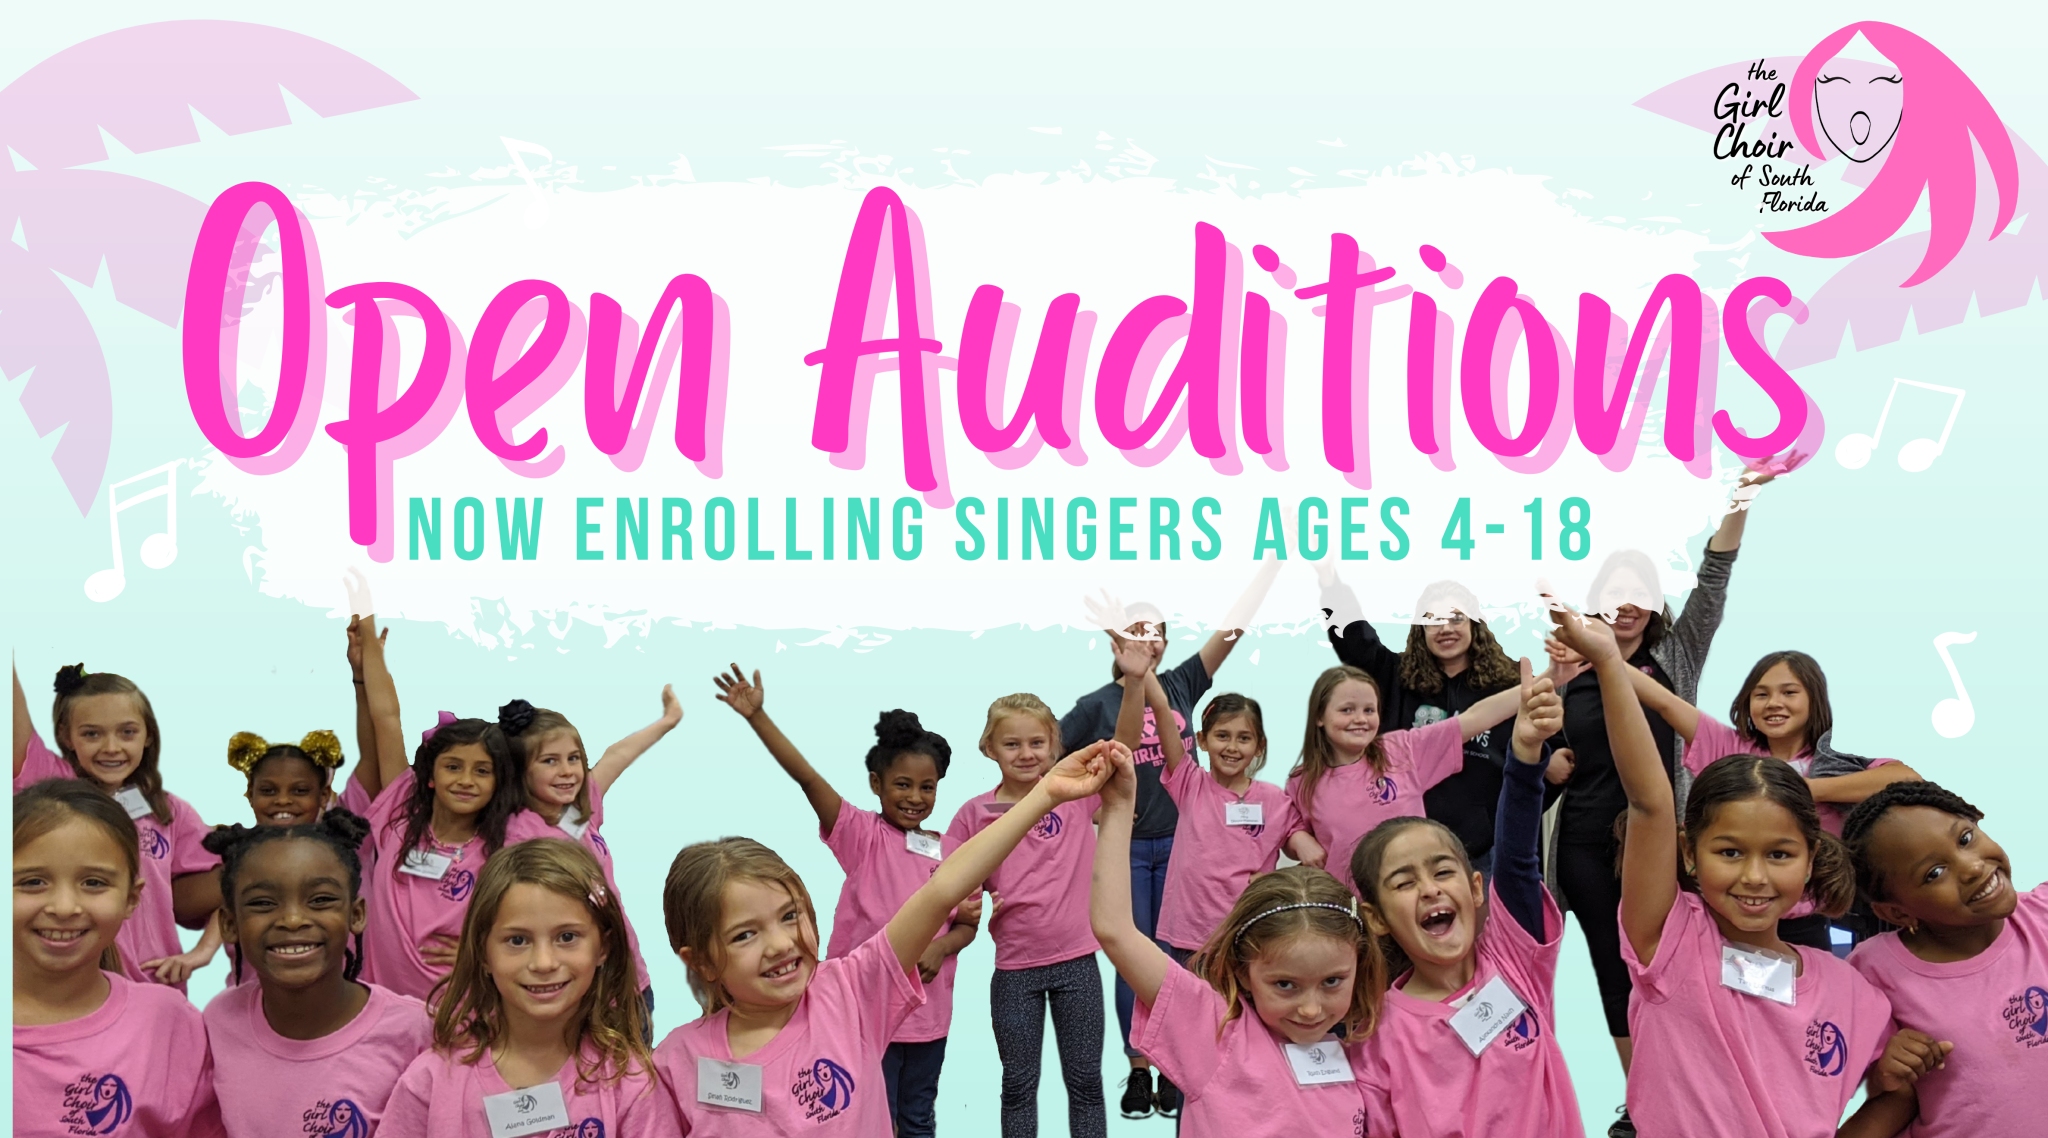 Open Audition